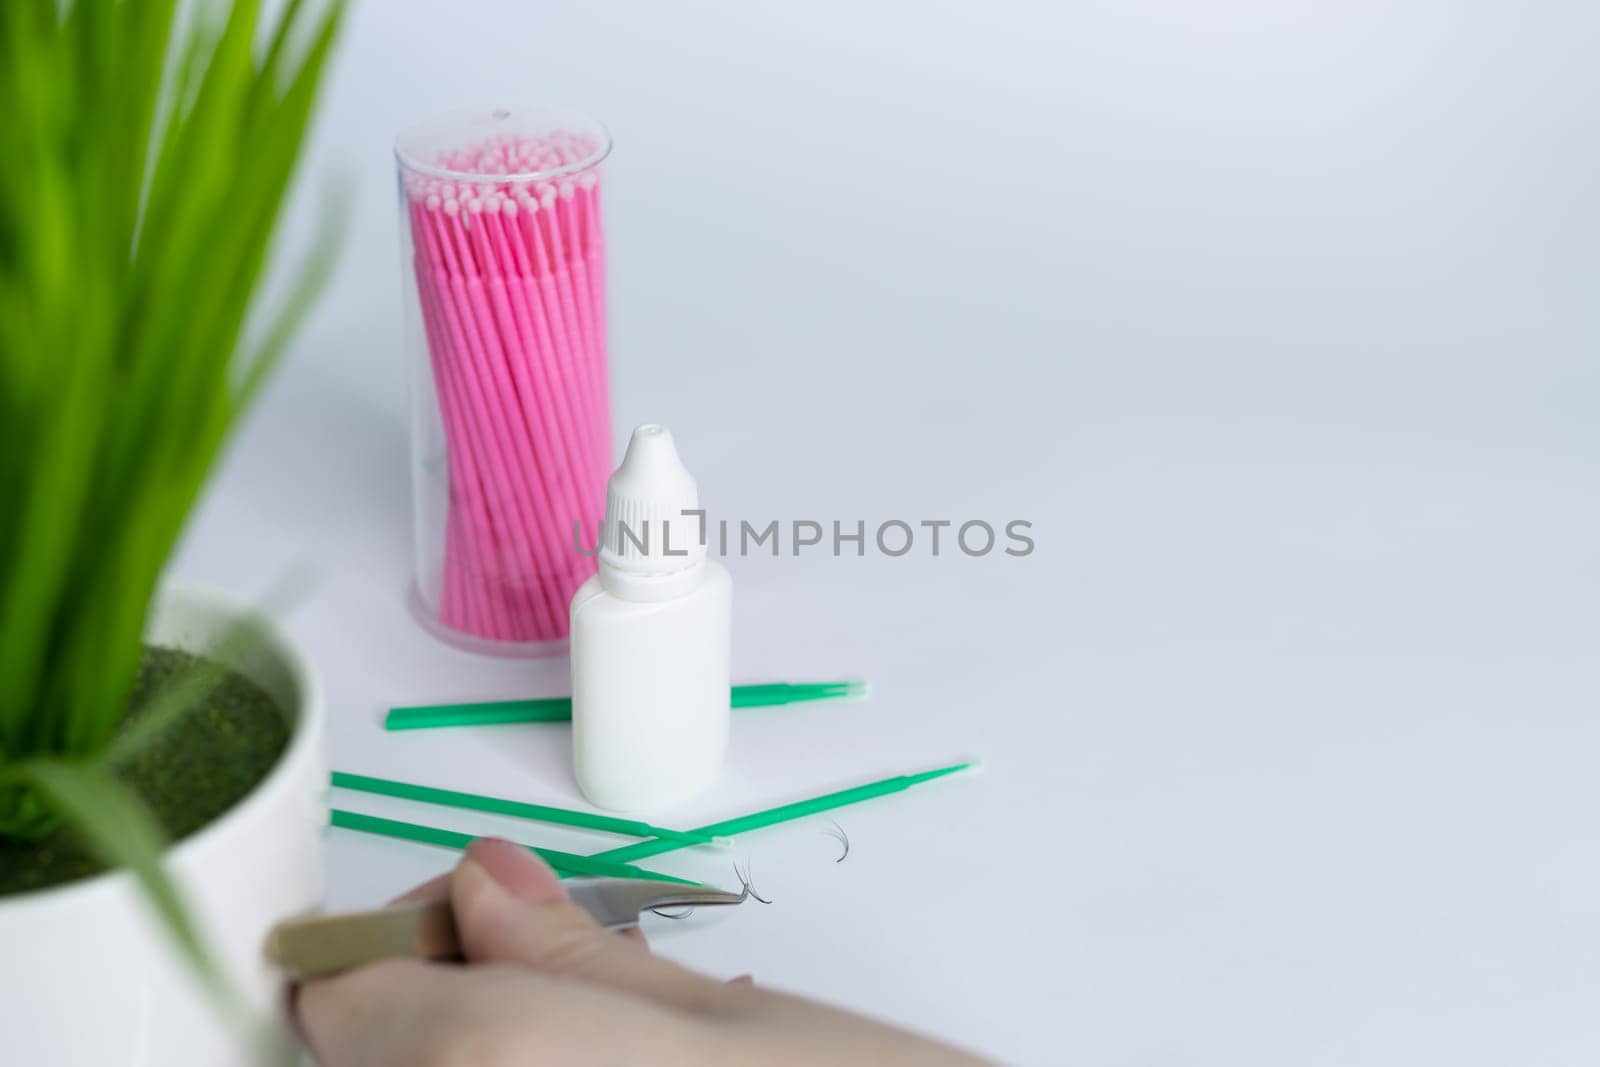 Woman's hand holds eyelash extension tweezers and takes artificial eyelashes. Materials for eyelash extensions lie side by side on a white background. On the right there is a place for an inscription